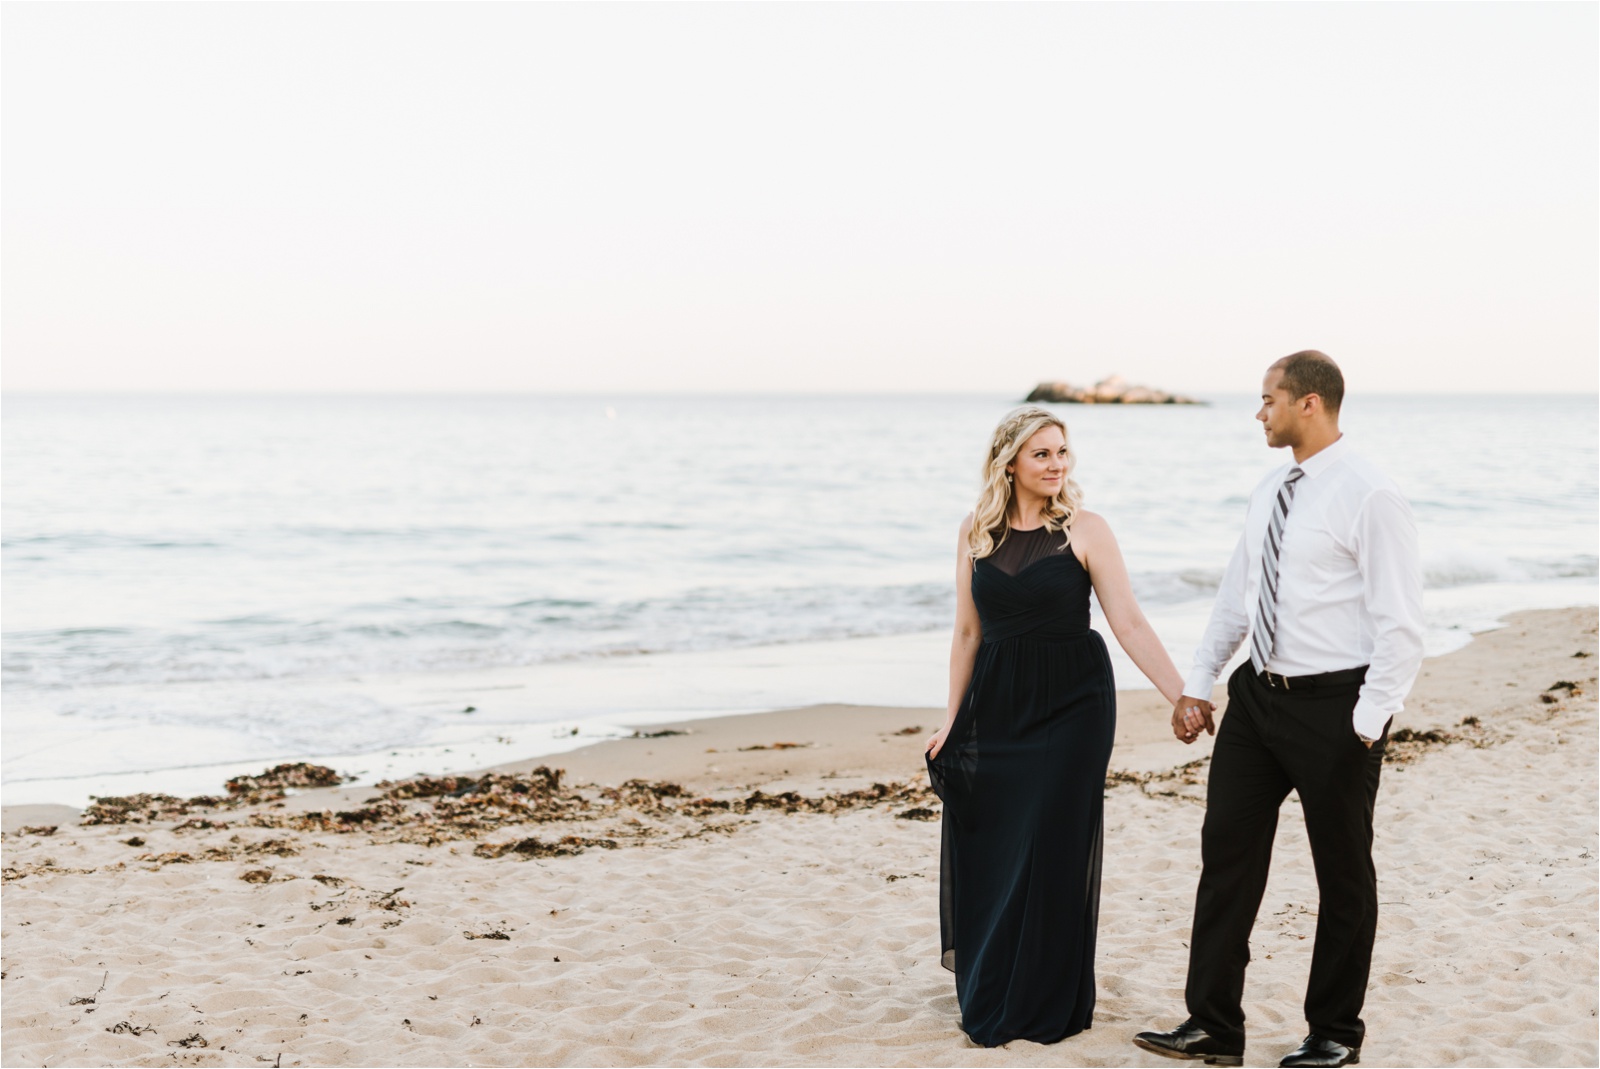 Formal & Romantic Engagement Session at Singing Beach in Manchester By the Sea, MA by Boston Wedding Photographer Annmarie Swift